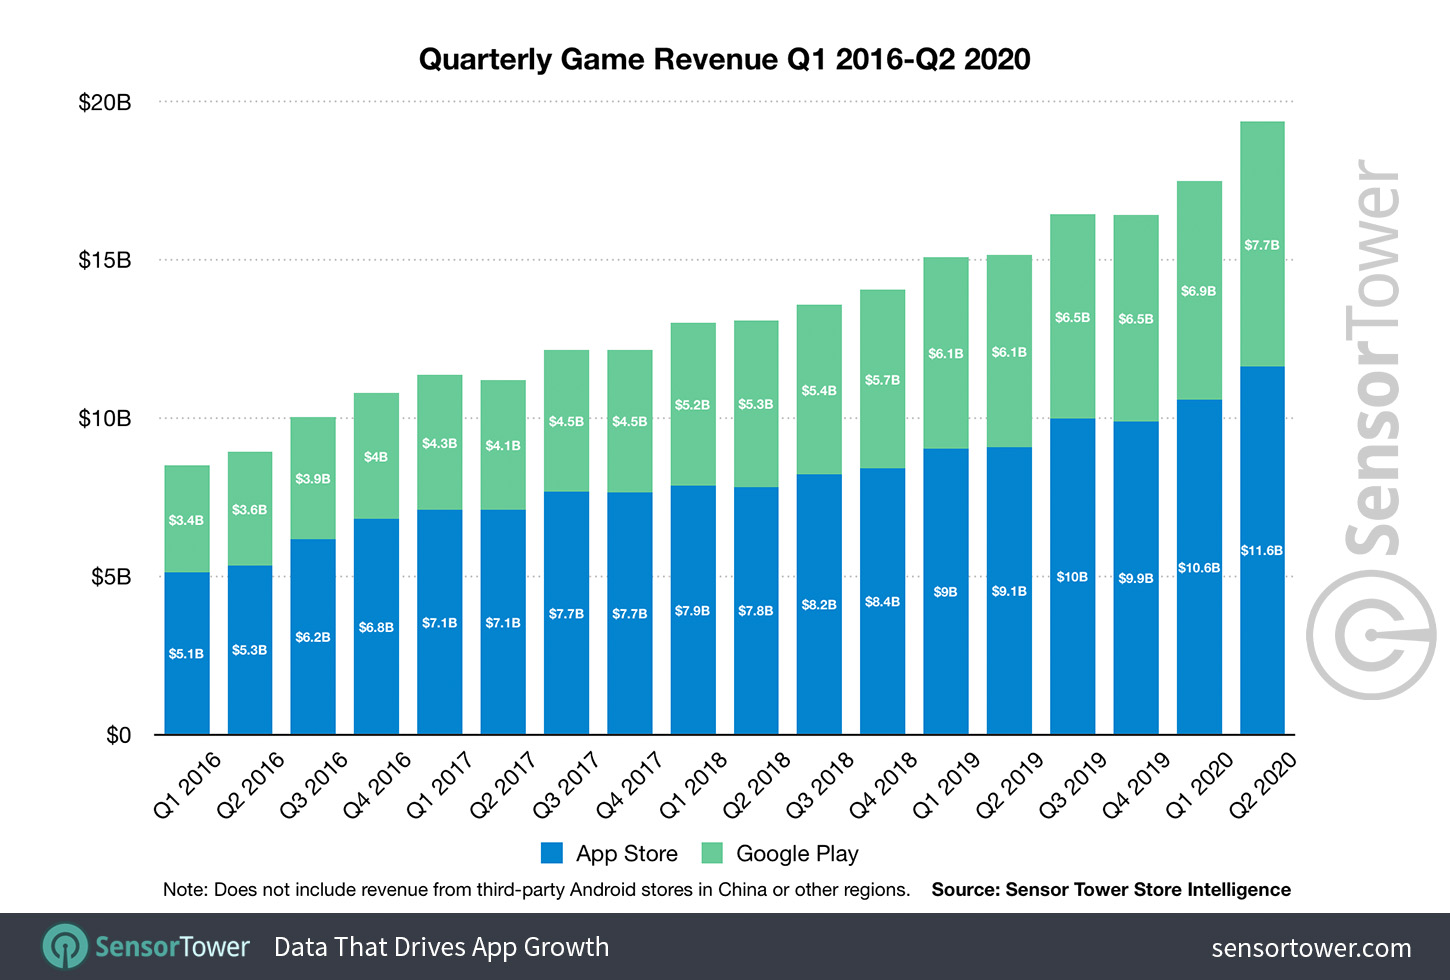 How Much Money Do Gaming rs Make from Ad Revenue?